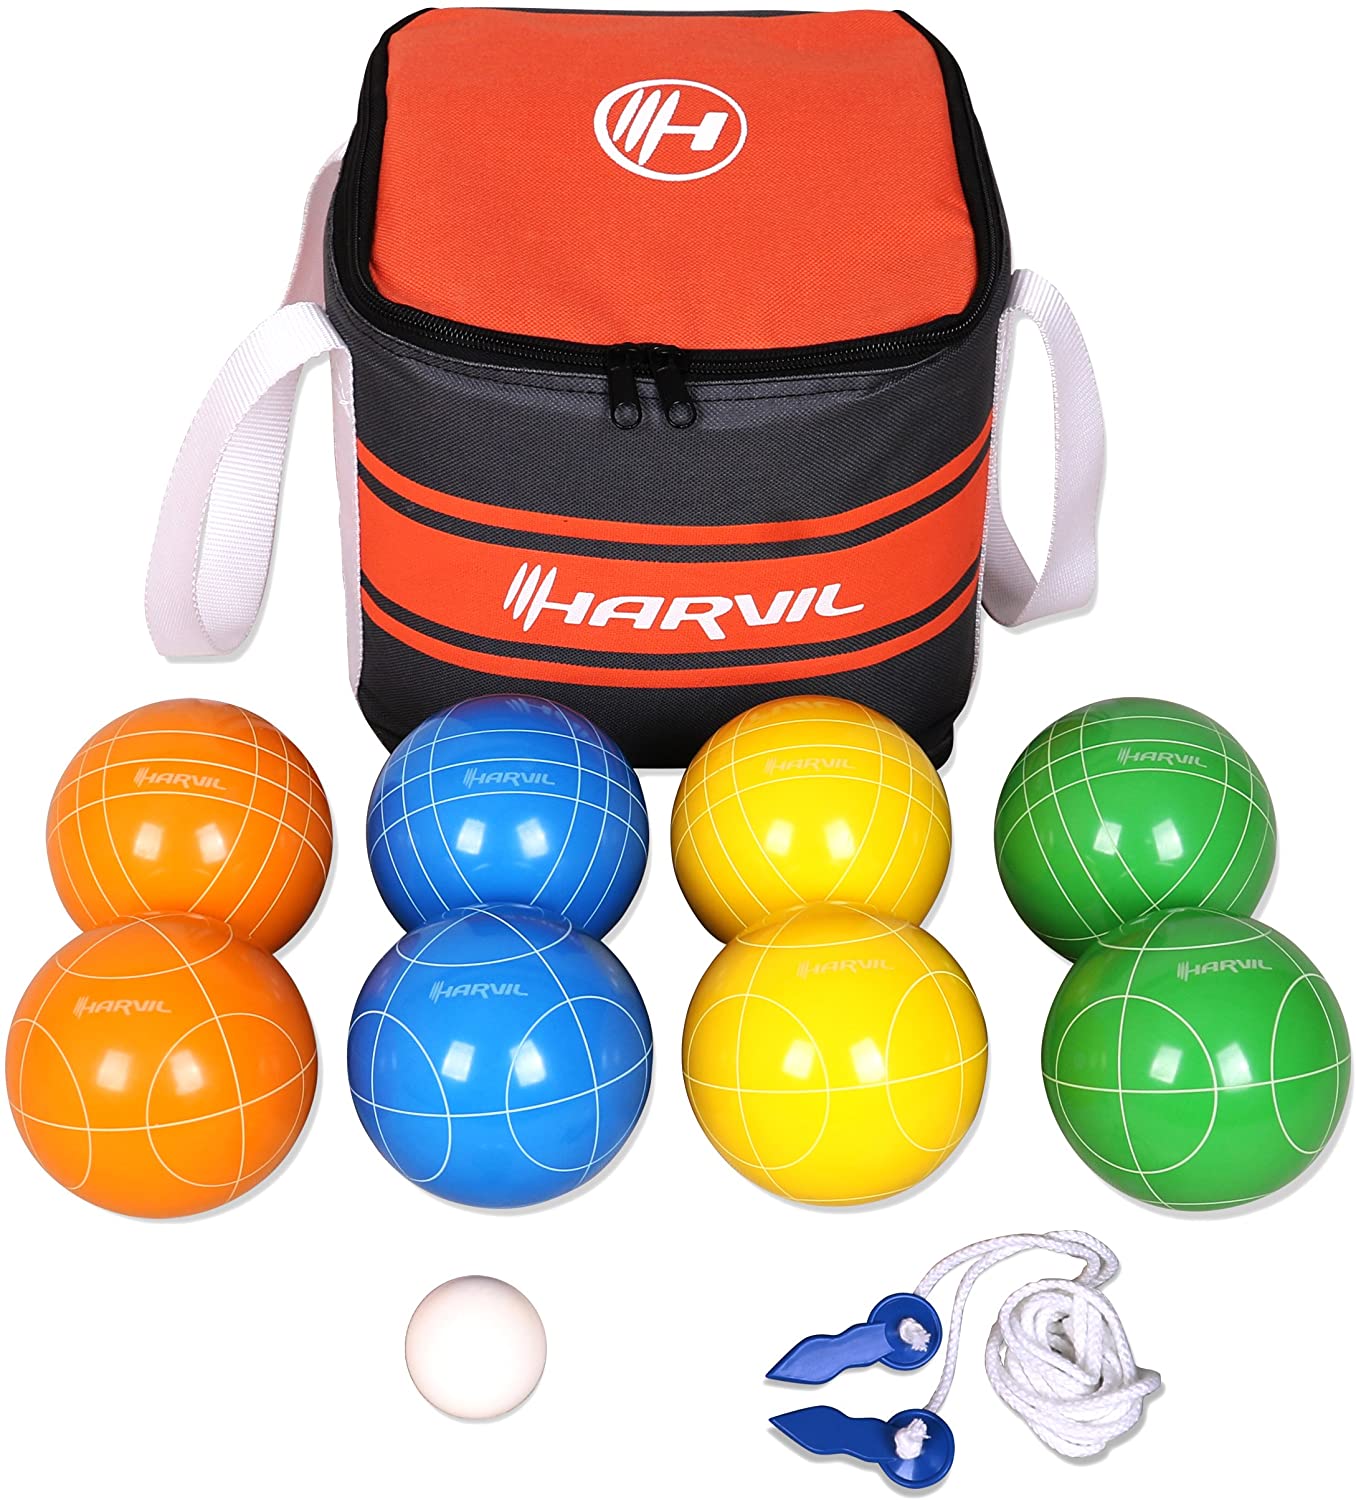 Harvil Poly-Resin Nylon Carrying Case & Measuring Rope Bocce Ball Set